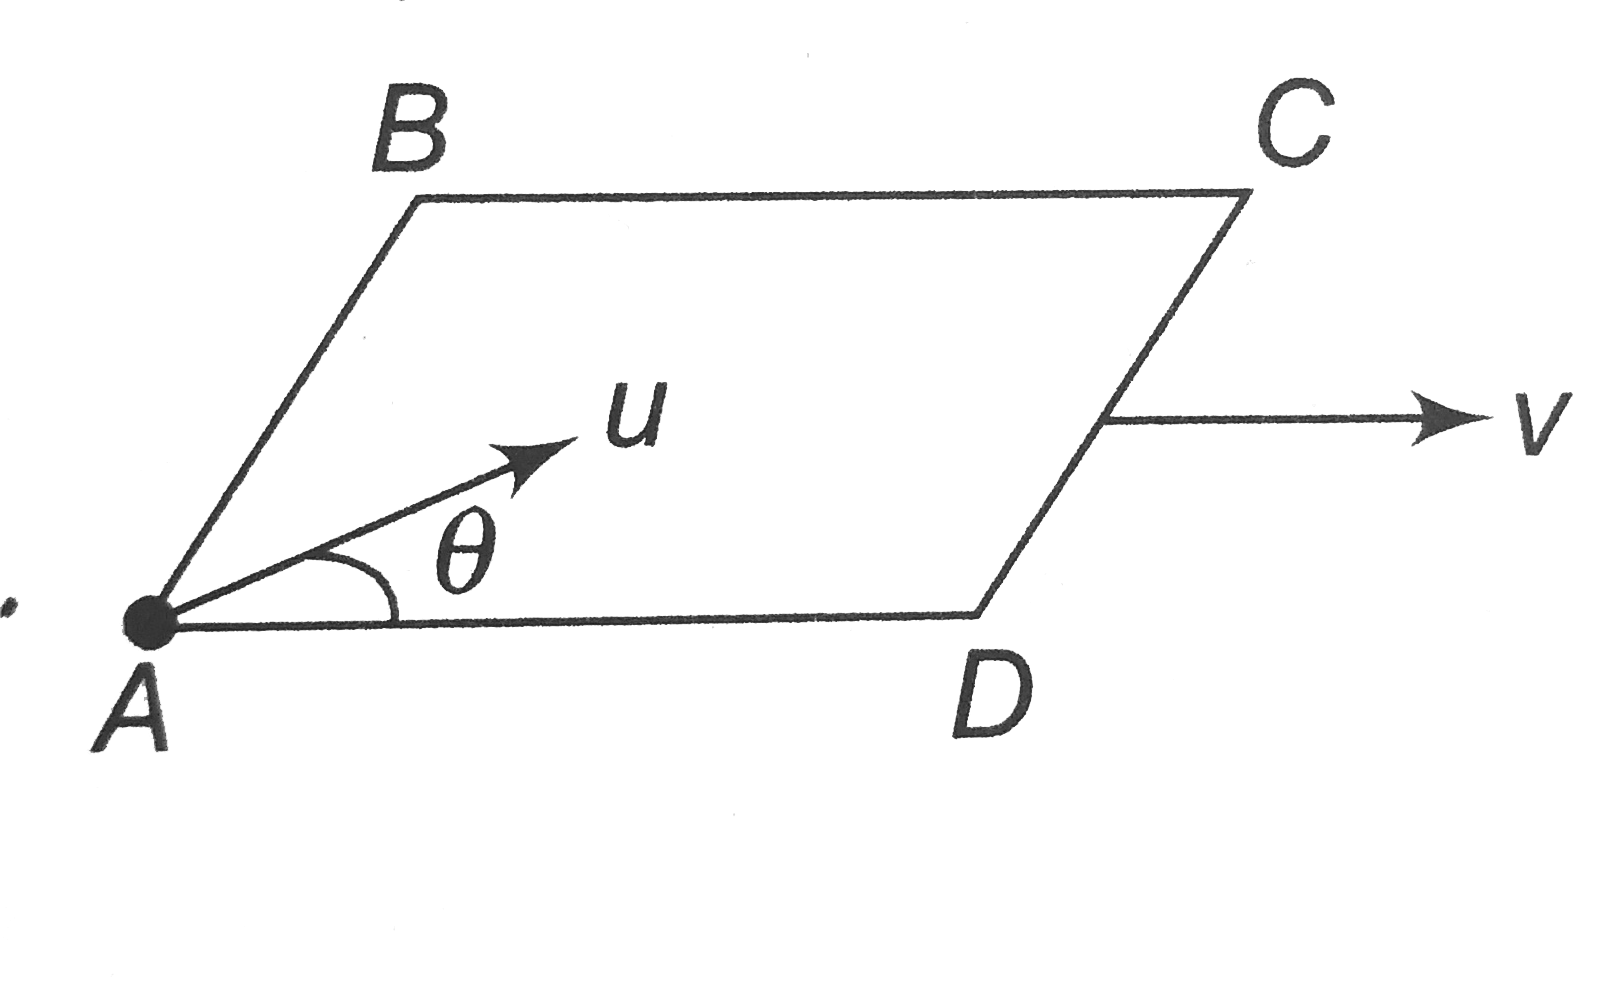 A smooth square platform ABCD is moving towards right with a uniform speed v. At what angle theta must a particle be projected from A with speed u so that it strikes the point B